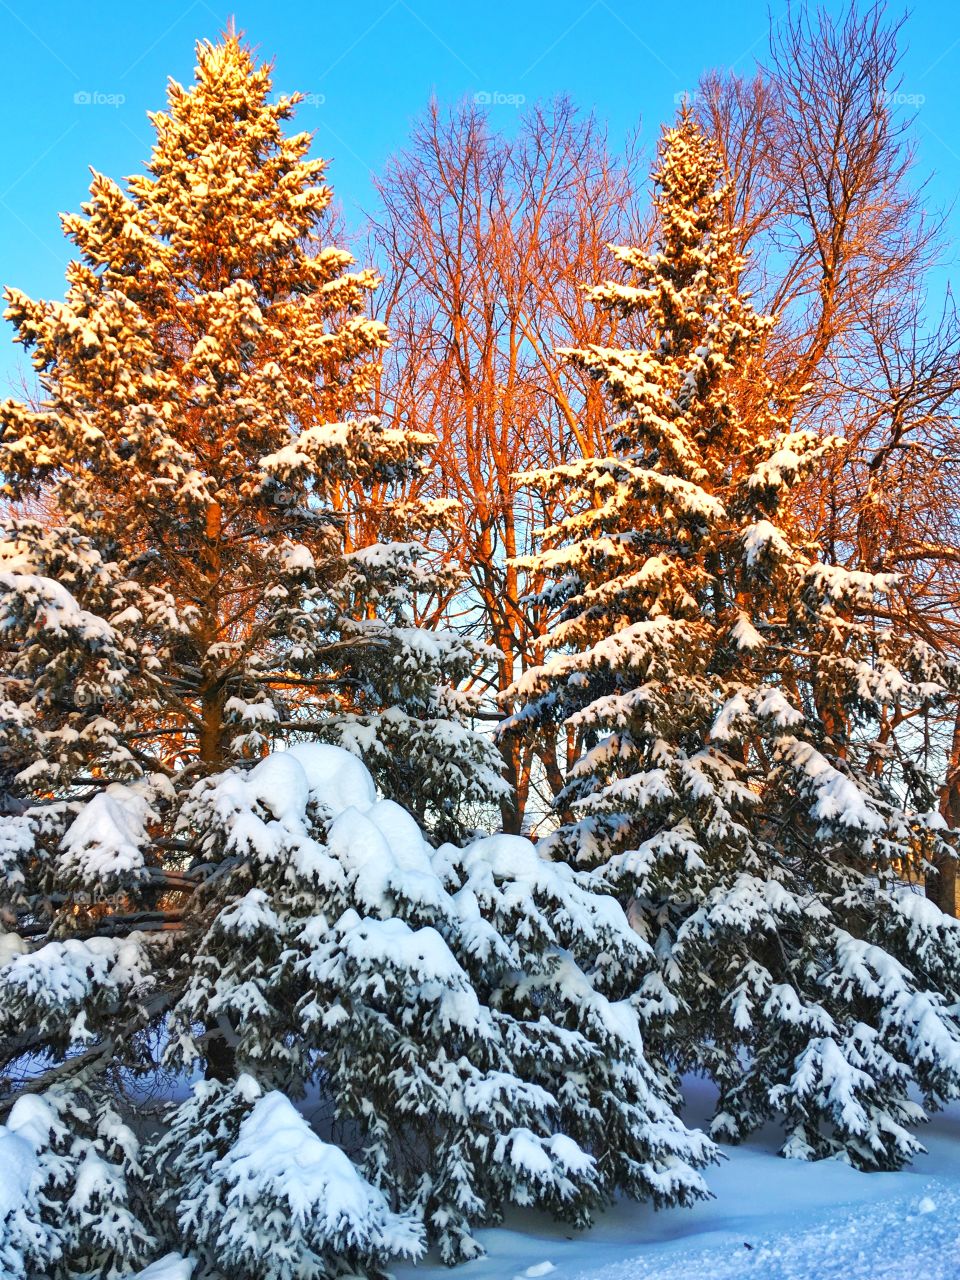 Trees covered by snow during winter